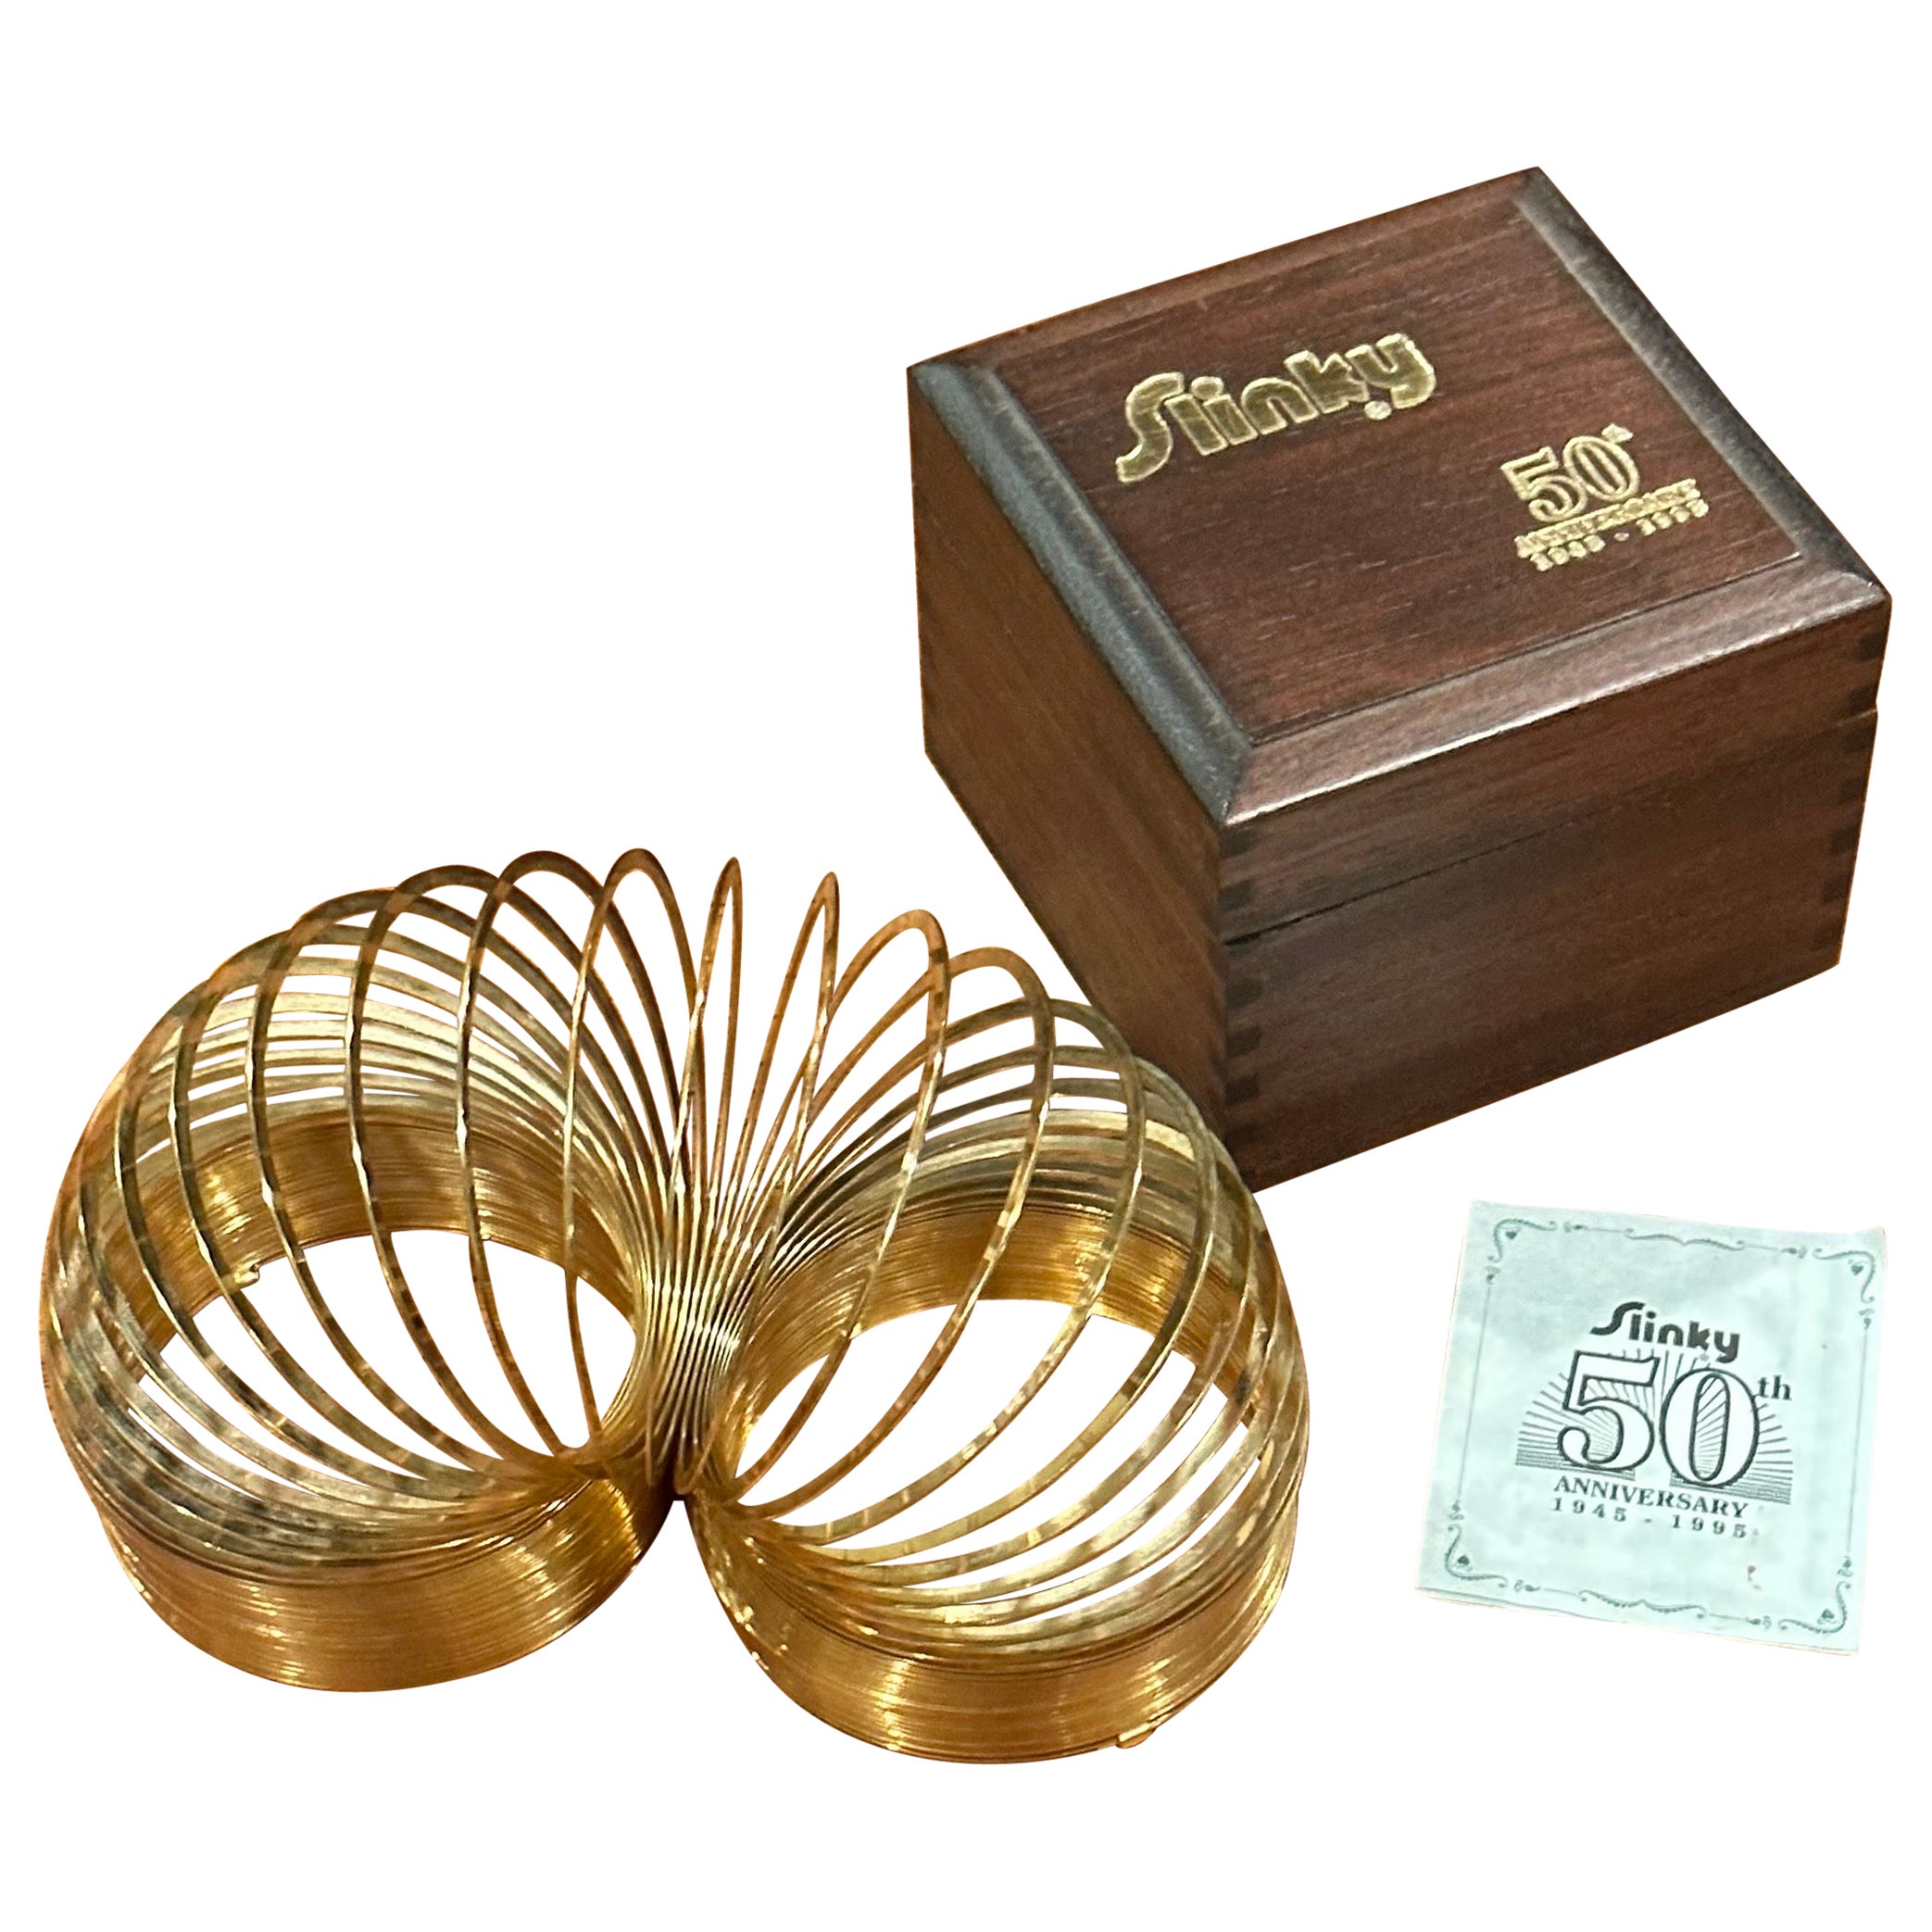 50th Anniversary Gold-Plated Slinky Toy in Wood Box For Sale